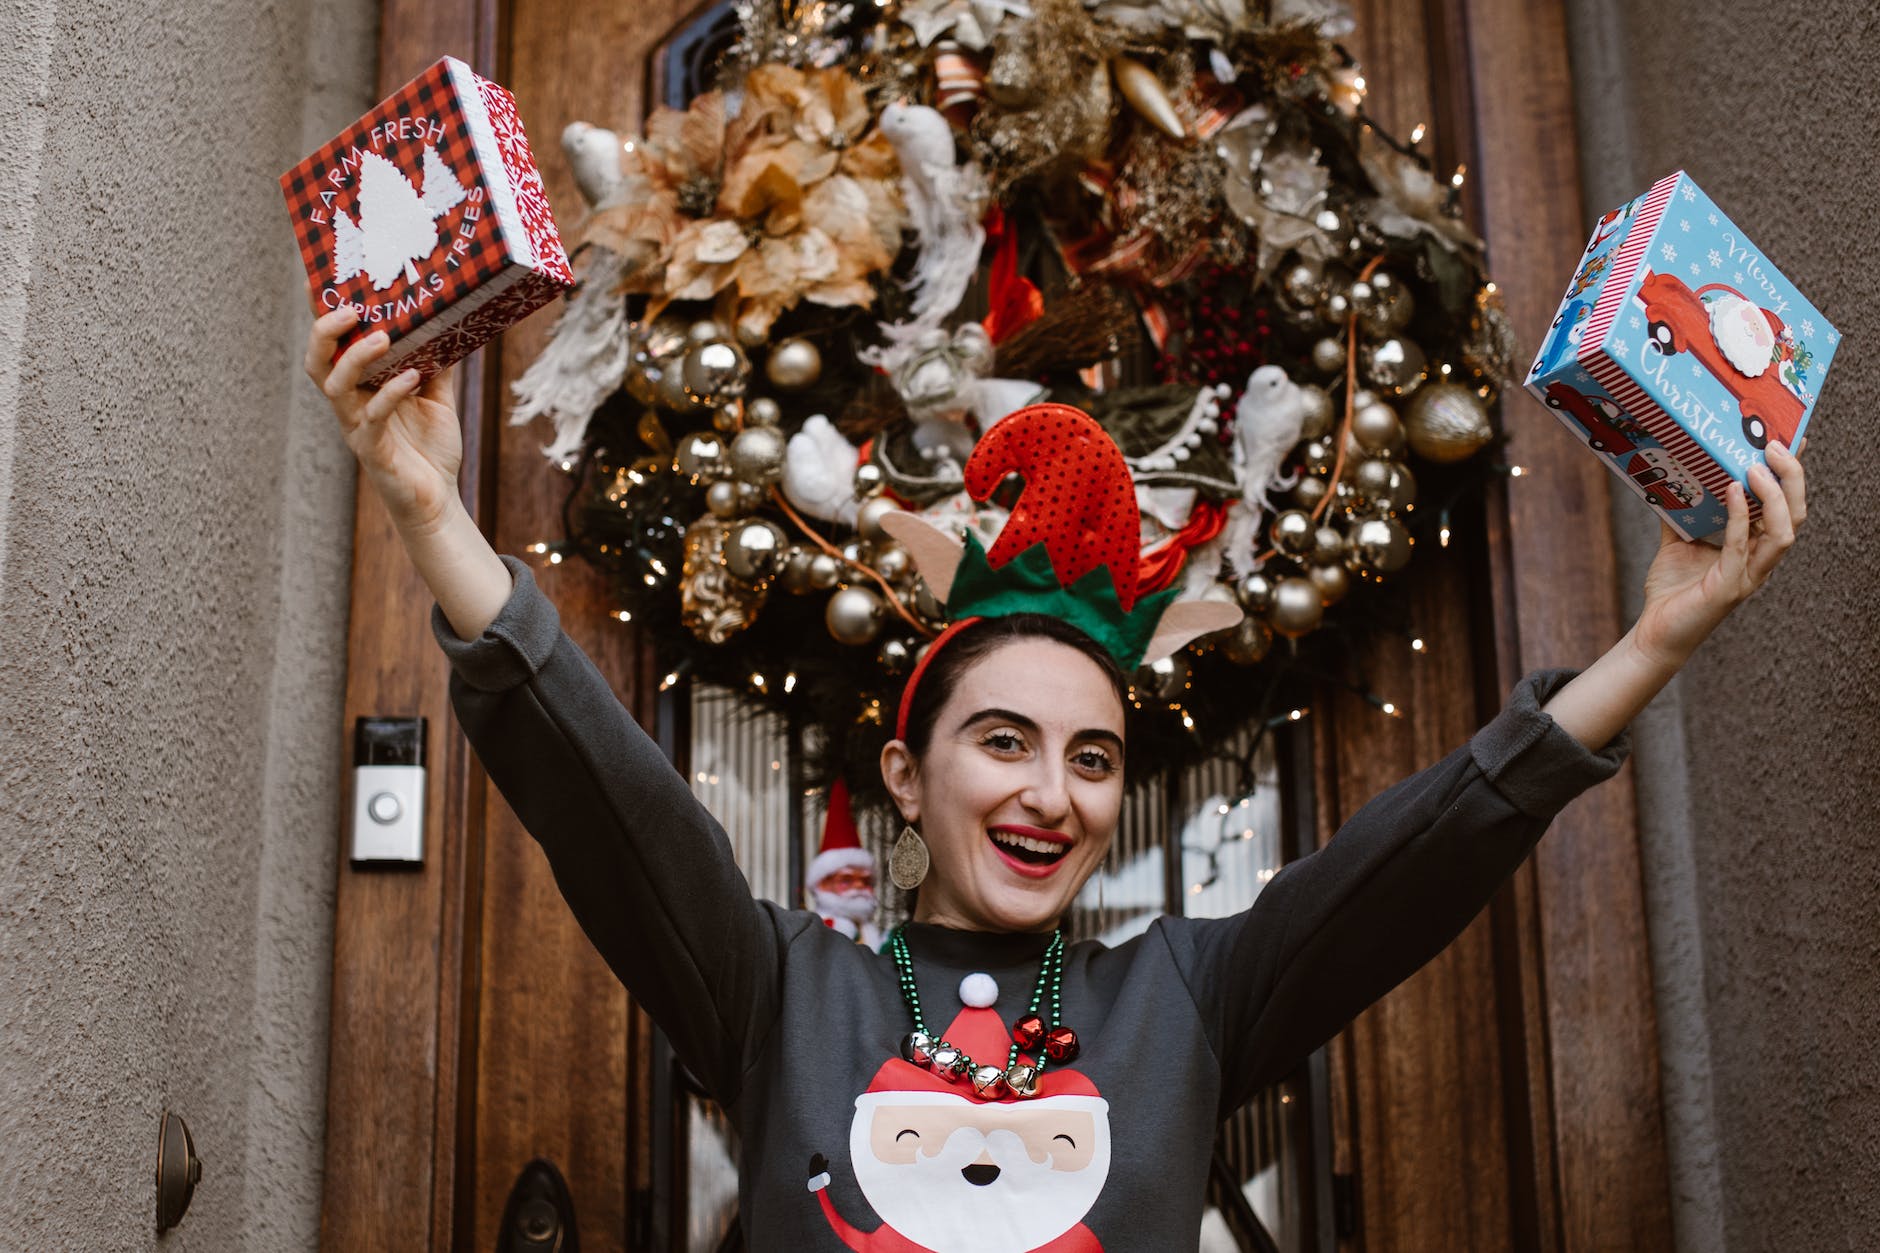 Festive And Fabulous: Embrace The Christmas Spirit with These Ugly Christmas Sweater Trends